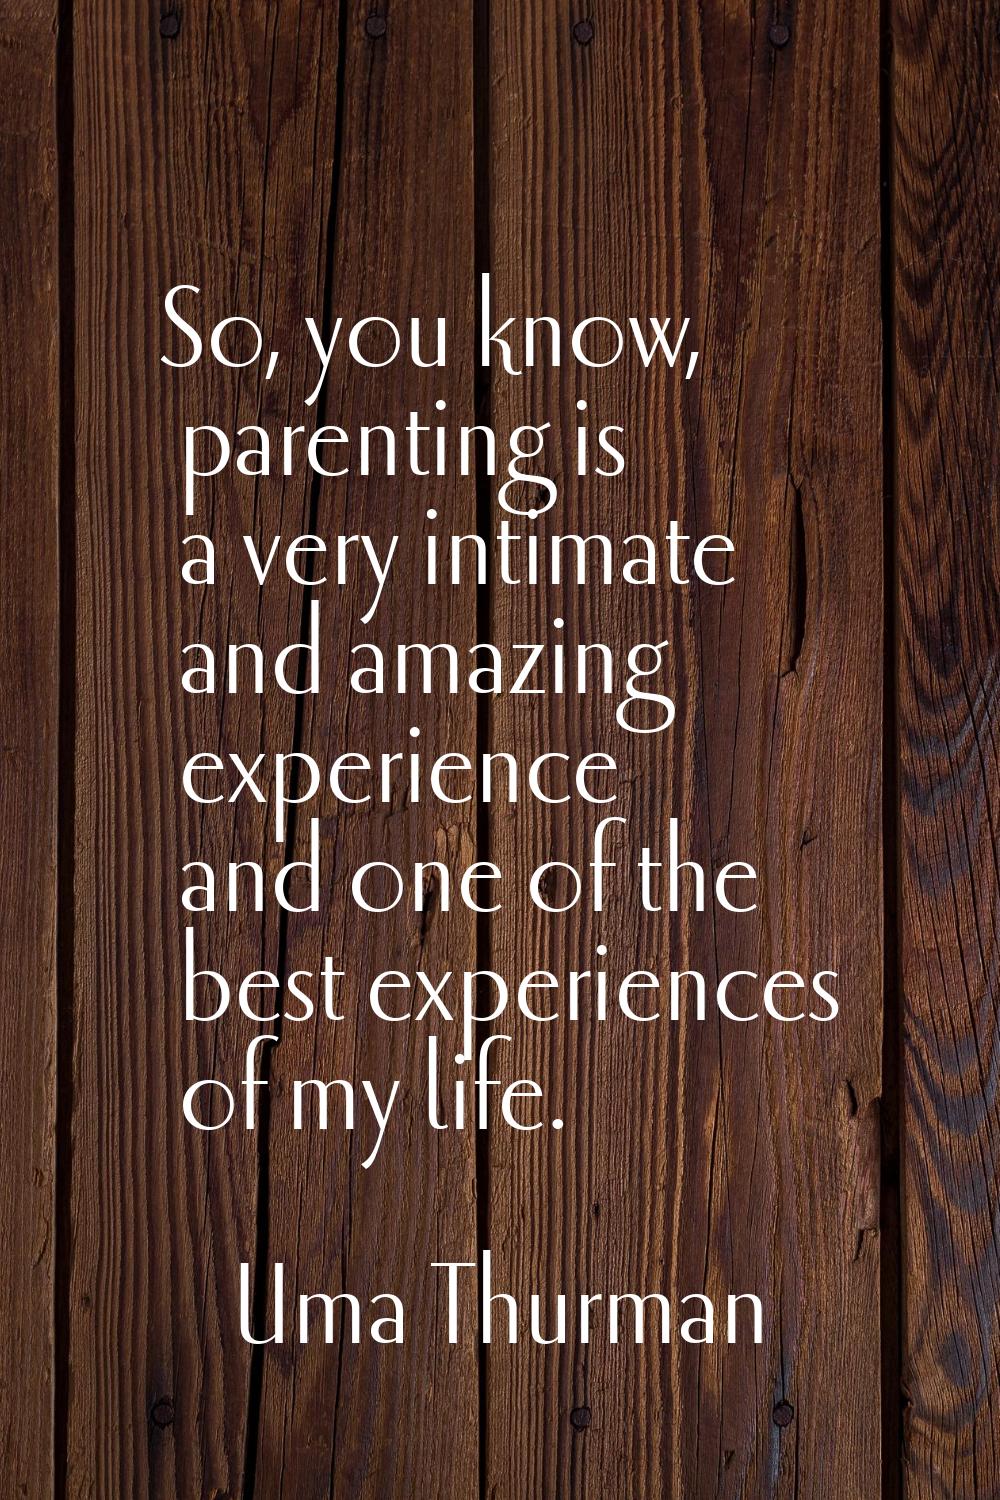 So, you know, parenting is a very intimate and amazing experience and one of the best experiences o